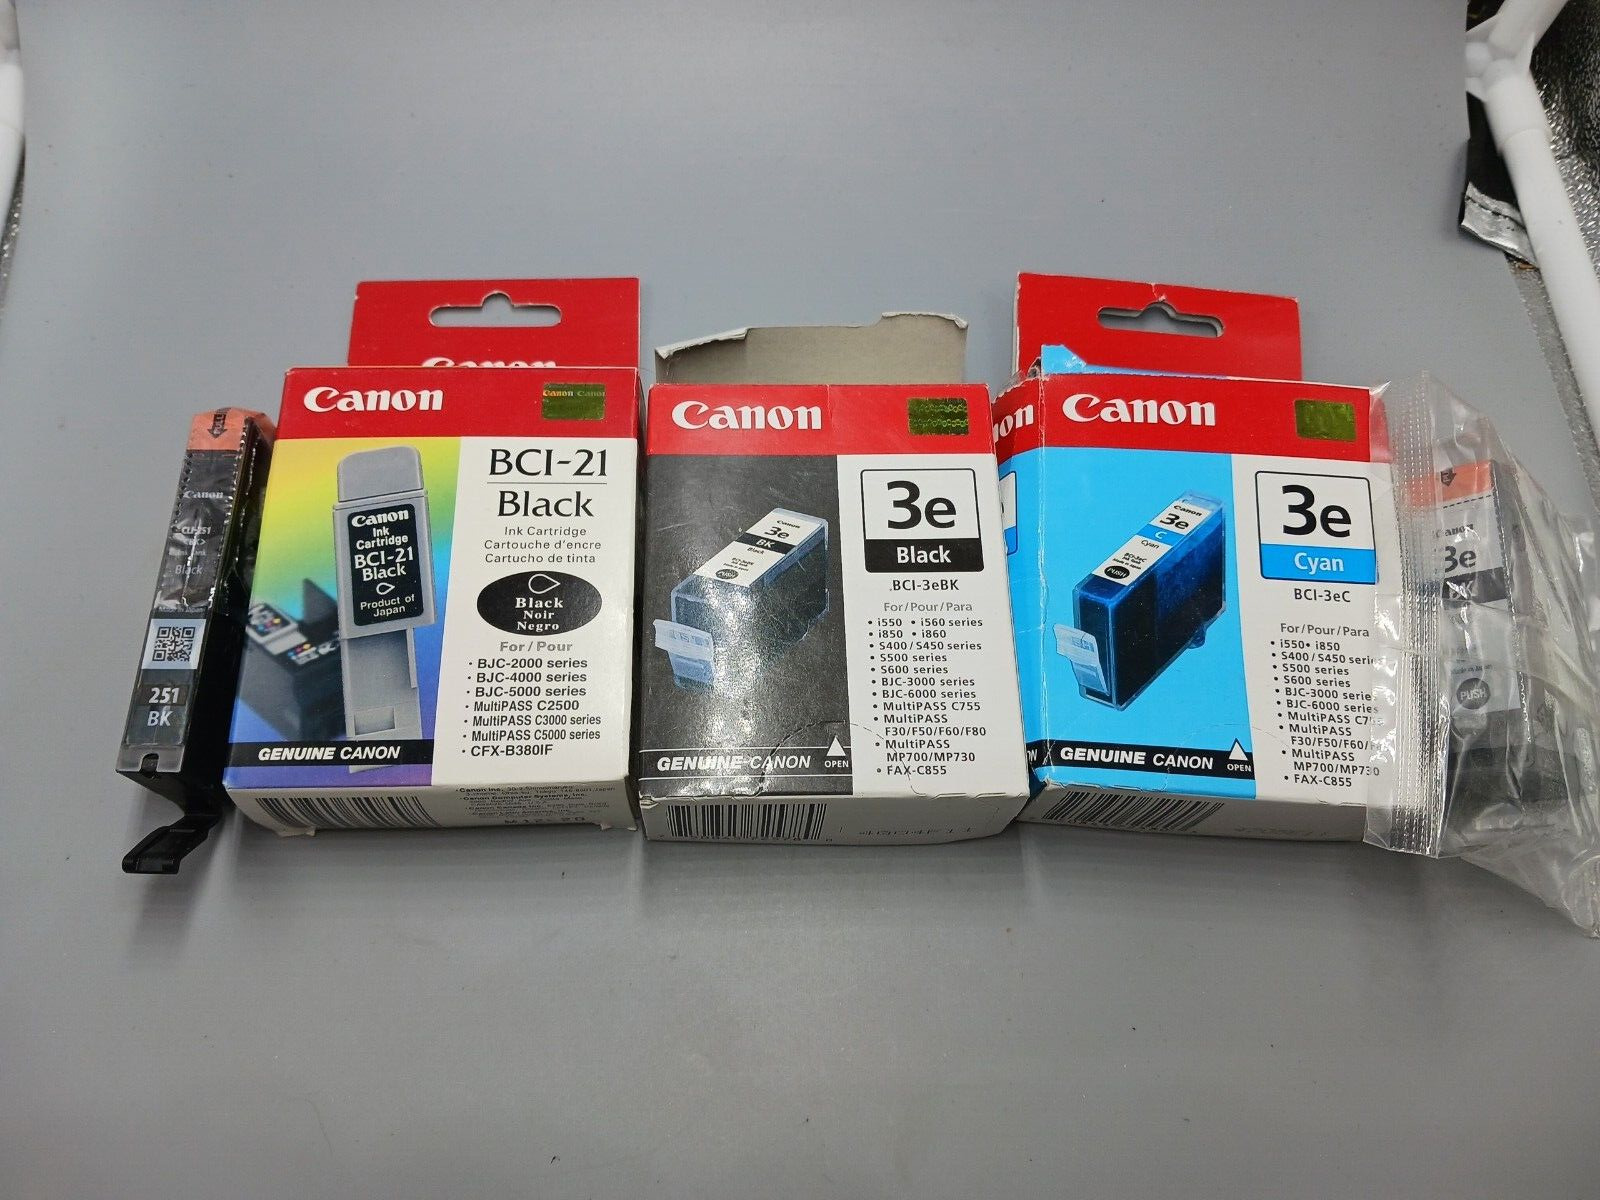 Mixed Lot Of 5 UNUSED Canon Ink Cartridges Bci-21 and 3e